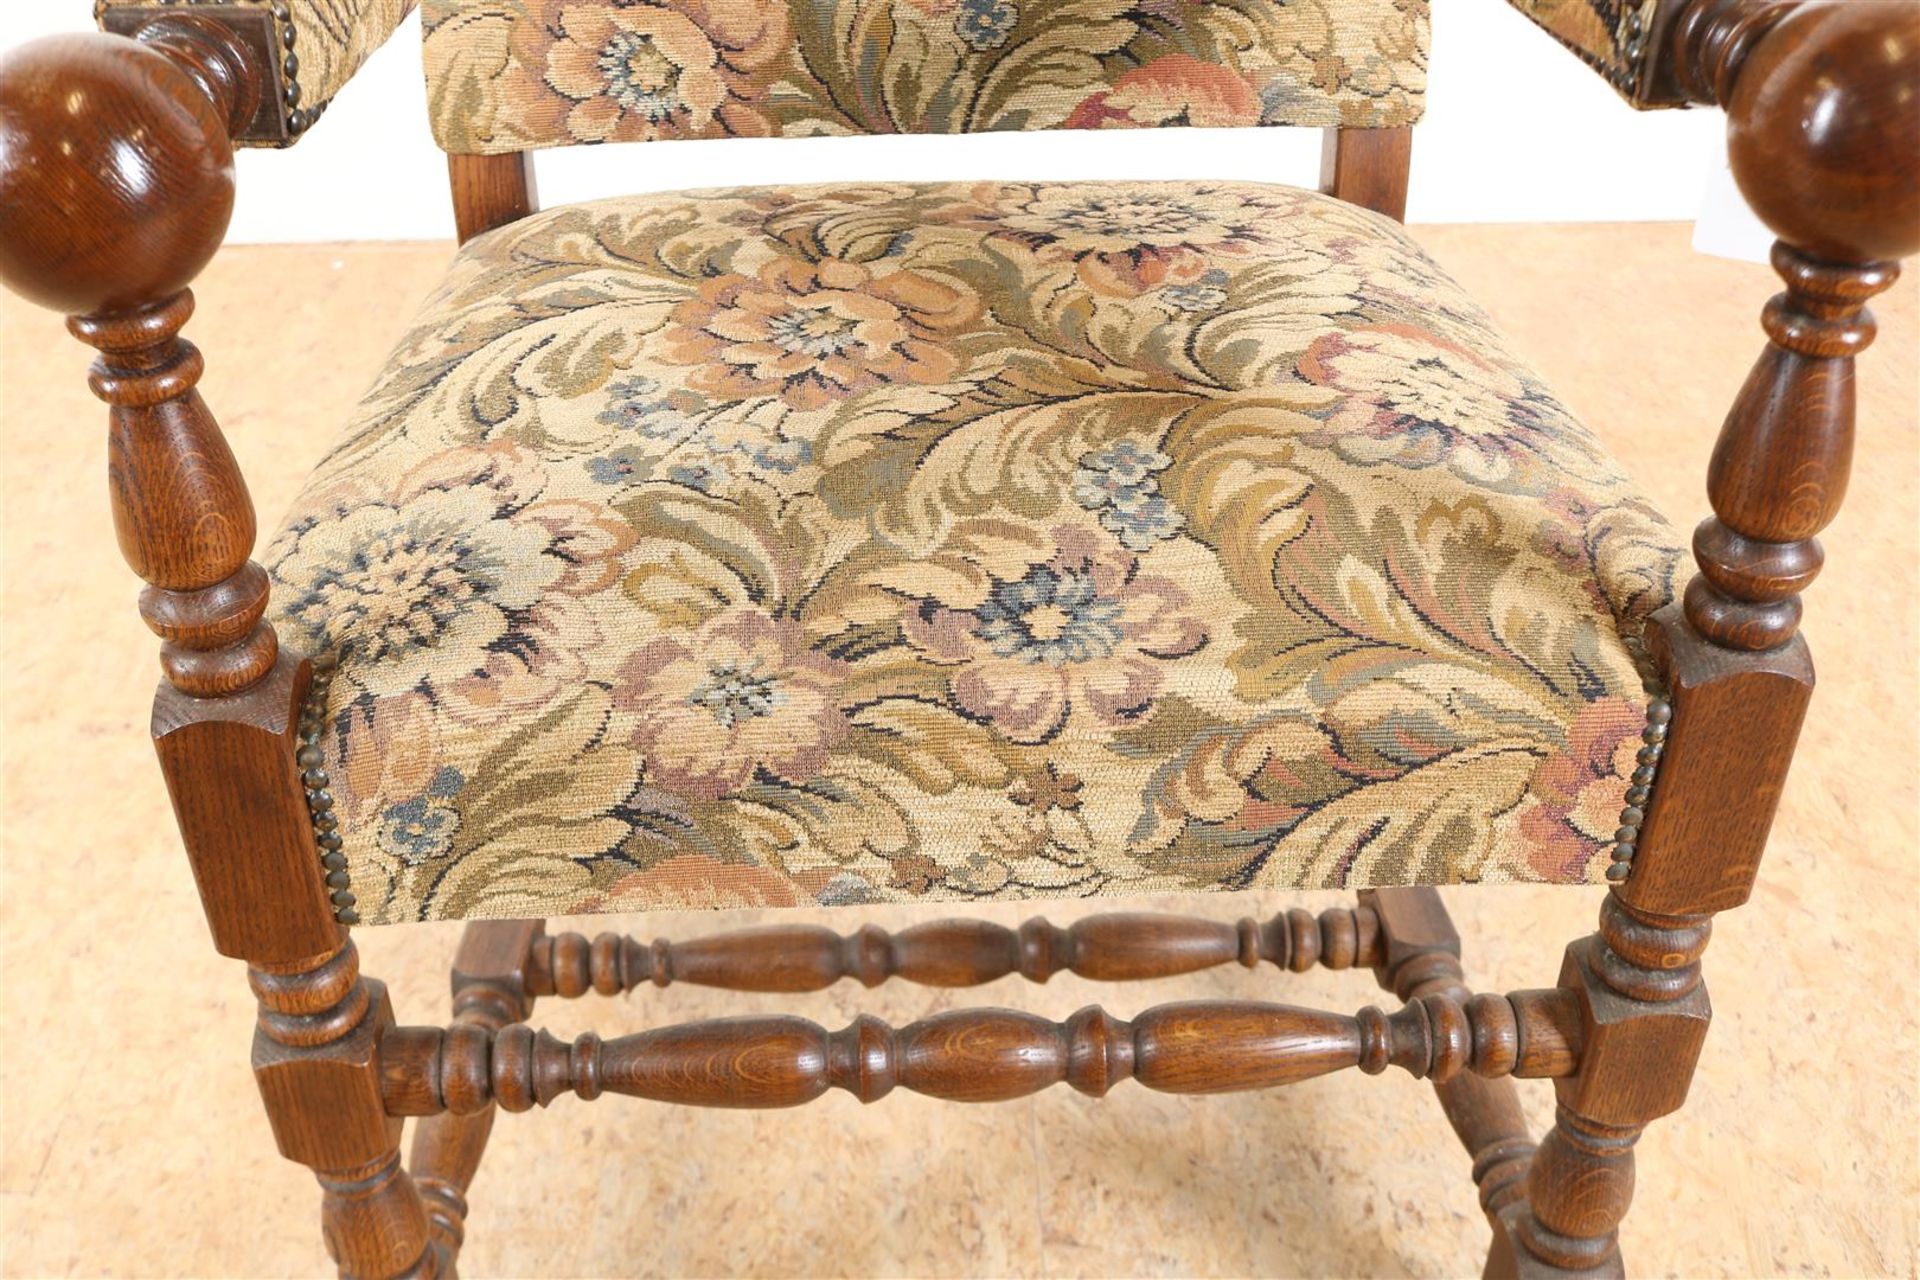 Oak Renaissance style armchair with embroidered upholstery. - Image 2 of 4